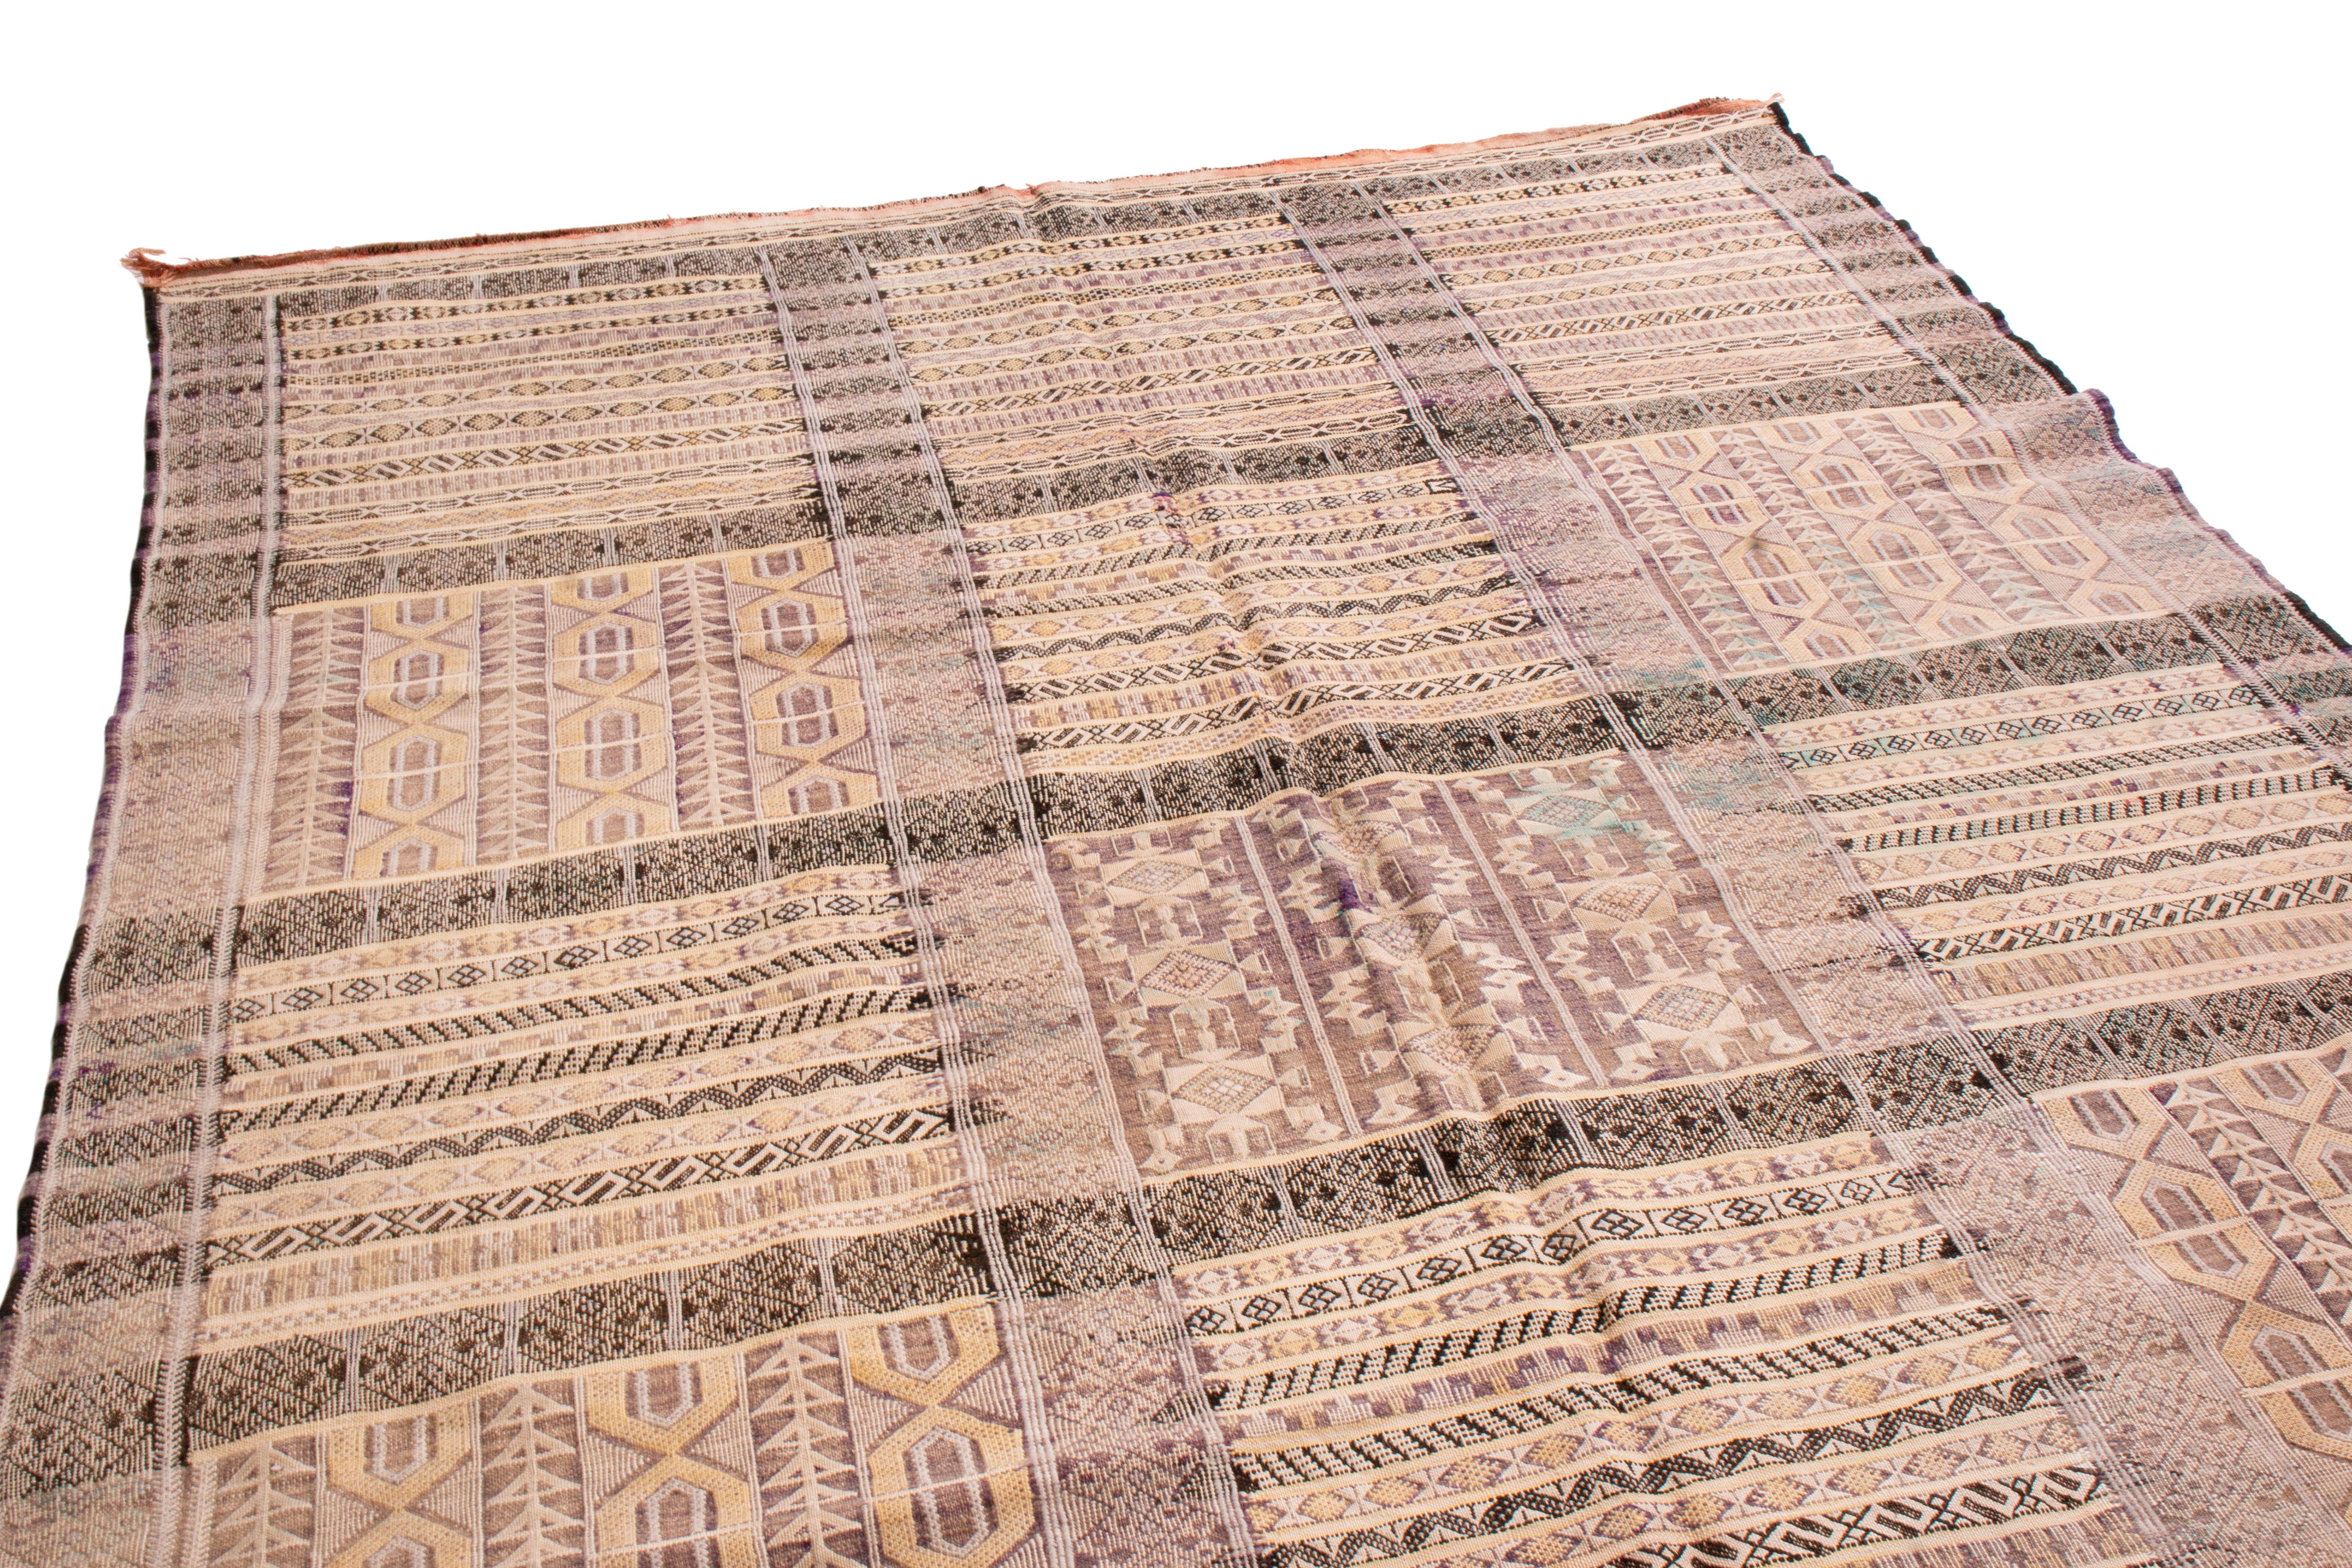 Handwoven in wool originating from Morocco circa 1950-1960, this vintage flat-weave connotes a midcentury Moroccan Kilim design, reversible with two distinctive sides in this play of beige-brown and purple hues with bold black and yellow accents.